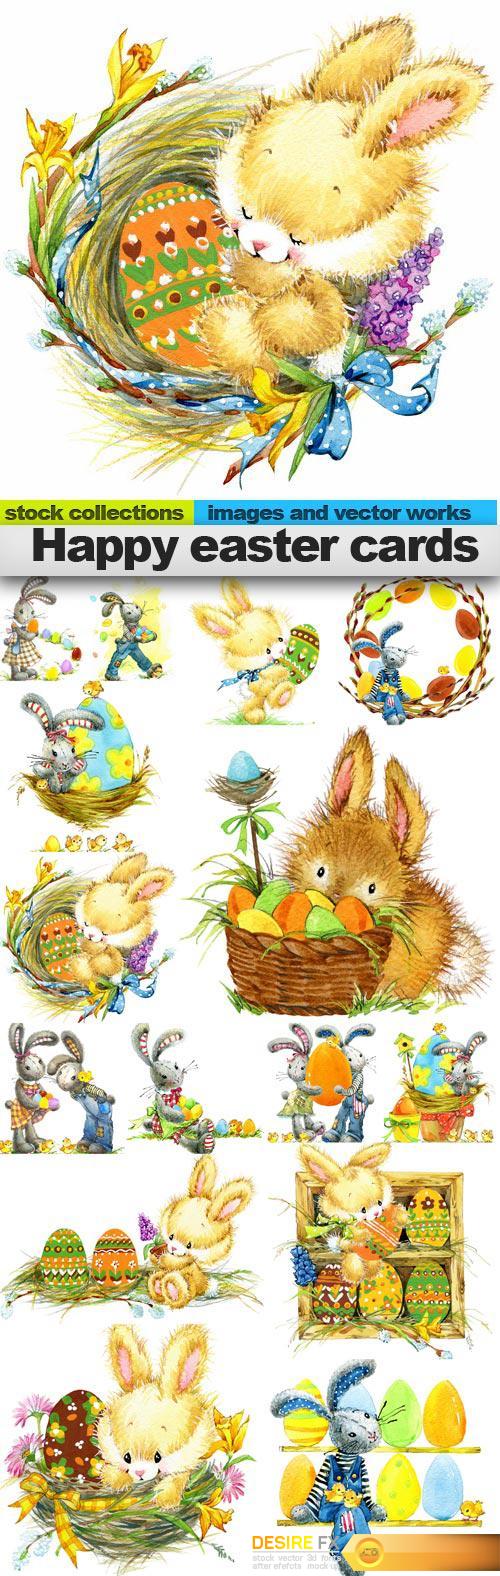 Happy easter cards, 15 x UHQ JPEG